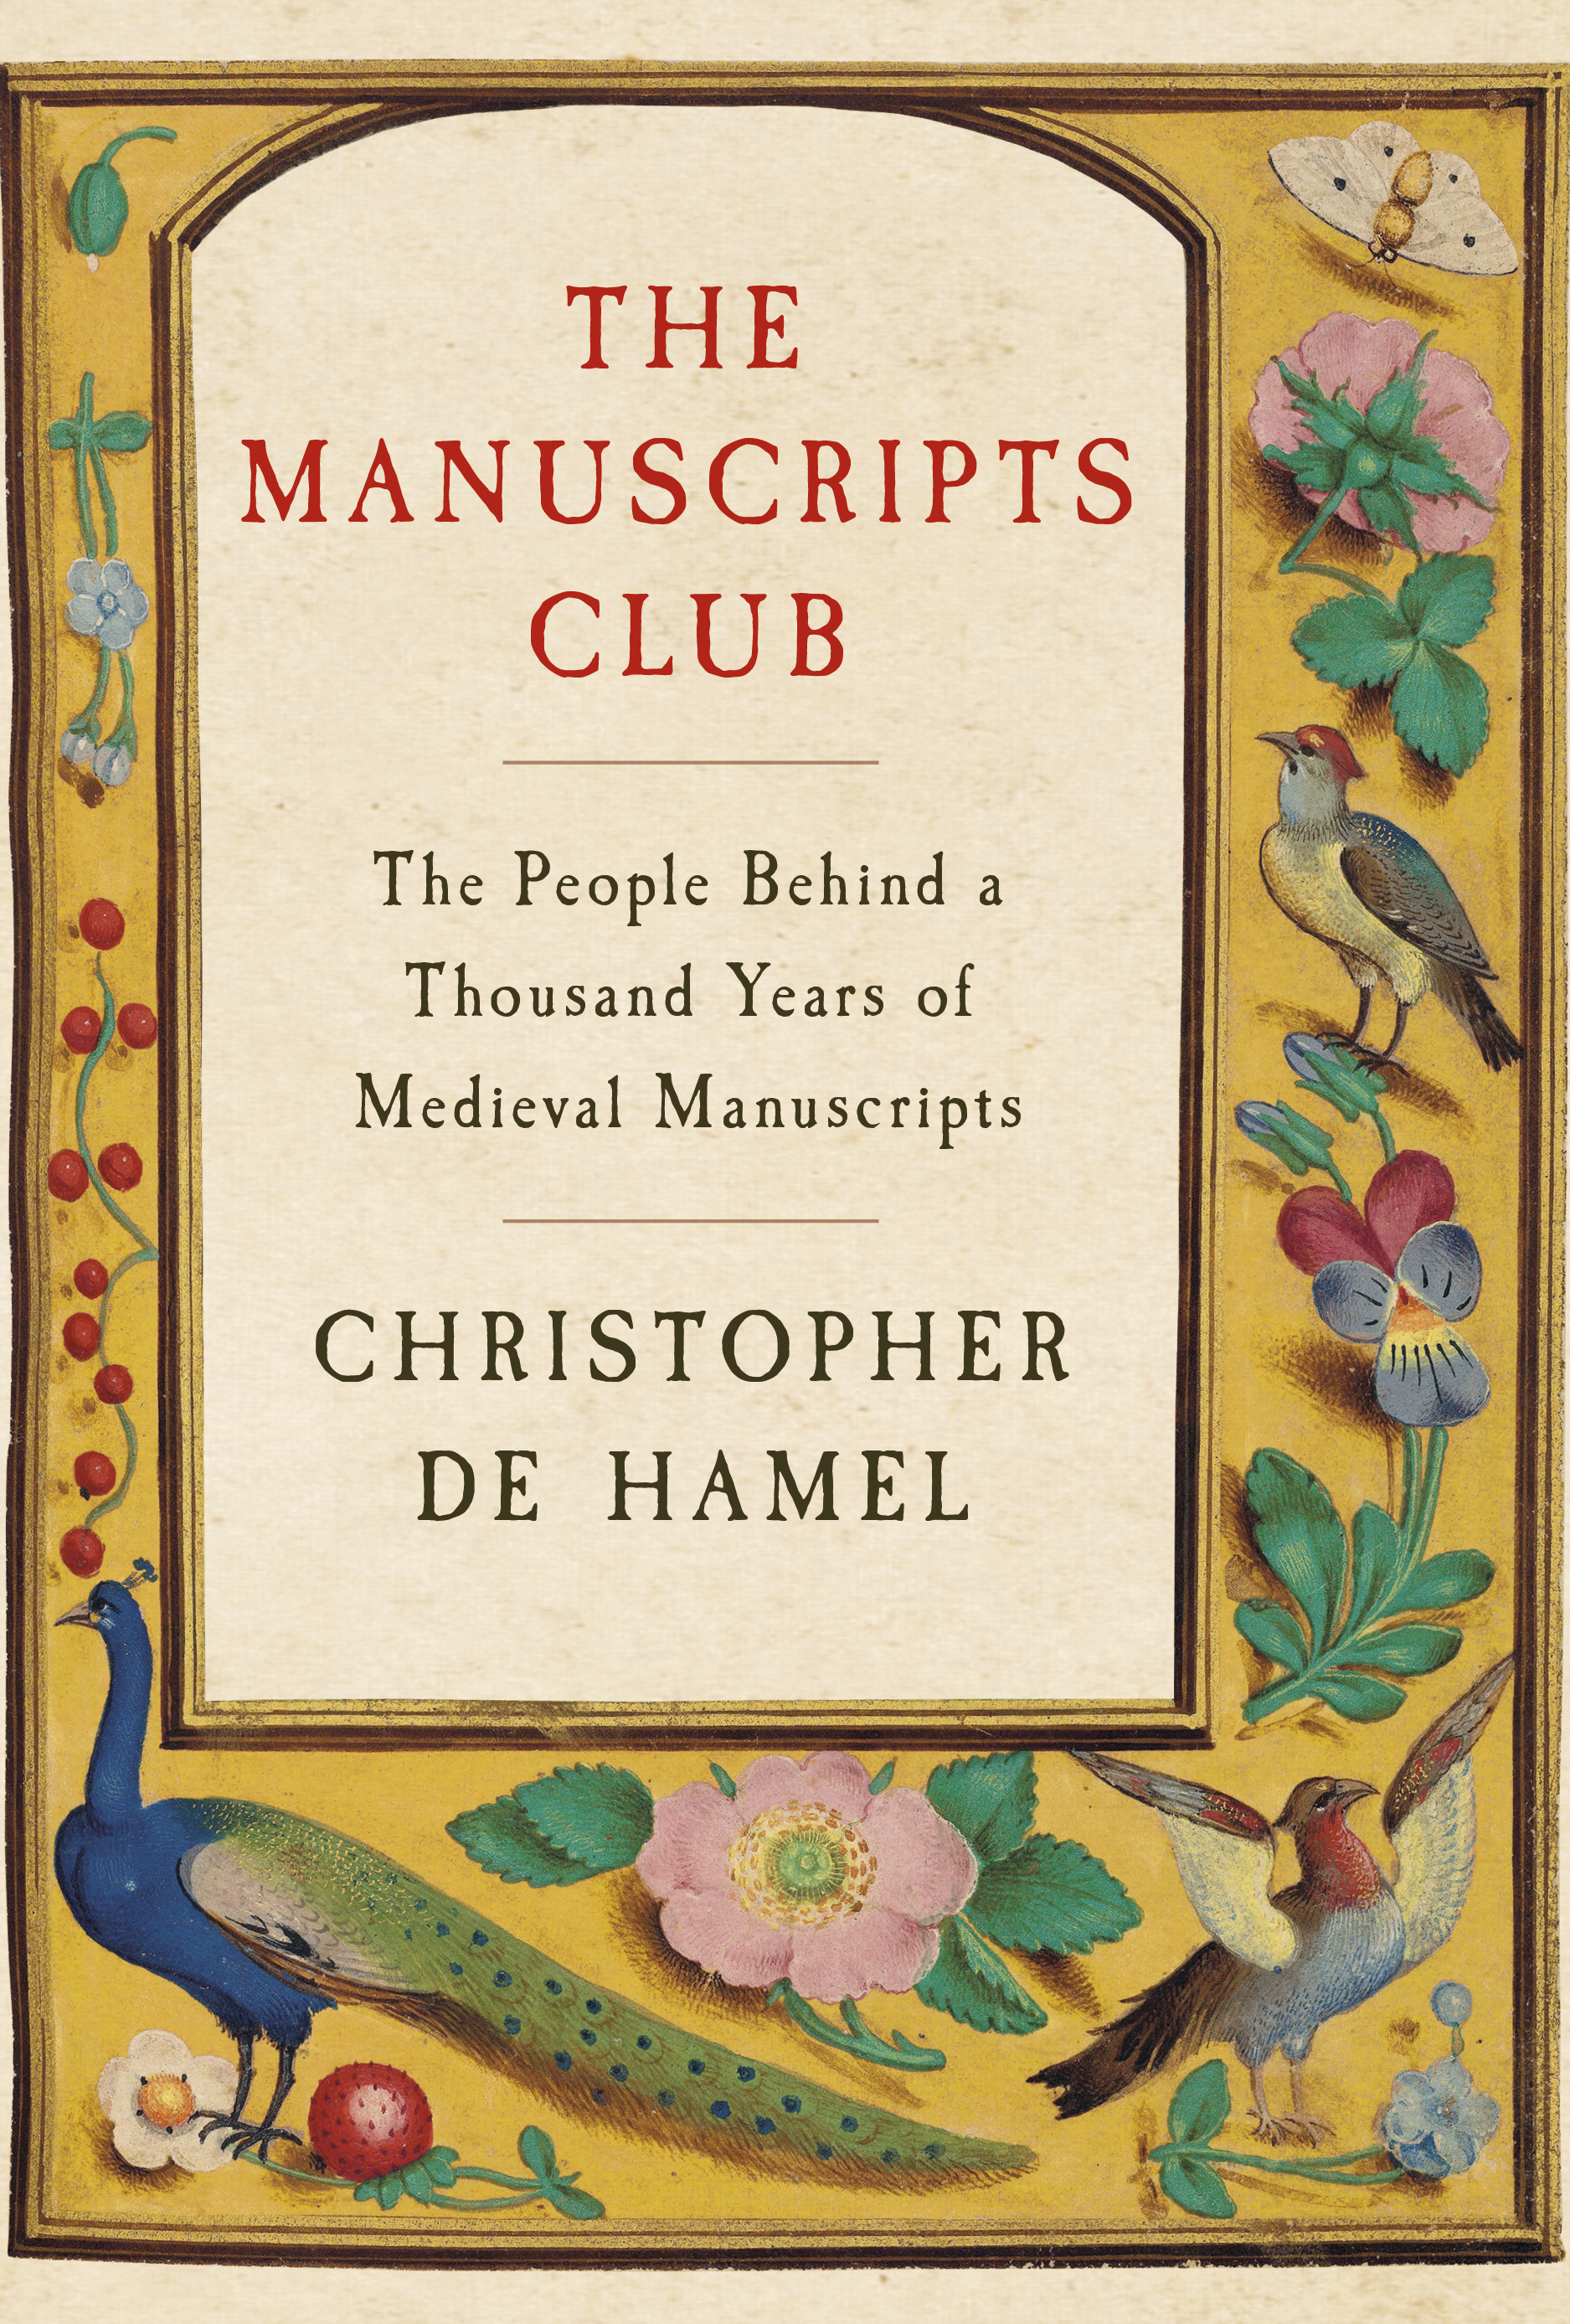 The Manuscripts Club : The People Behind a Thousand Years of Medieval Manuscripts | de Hamel, Christopher (Auteur)